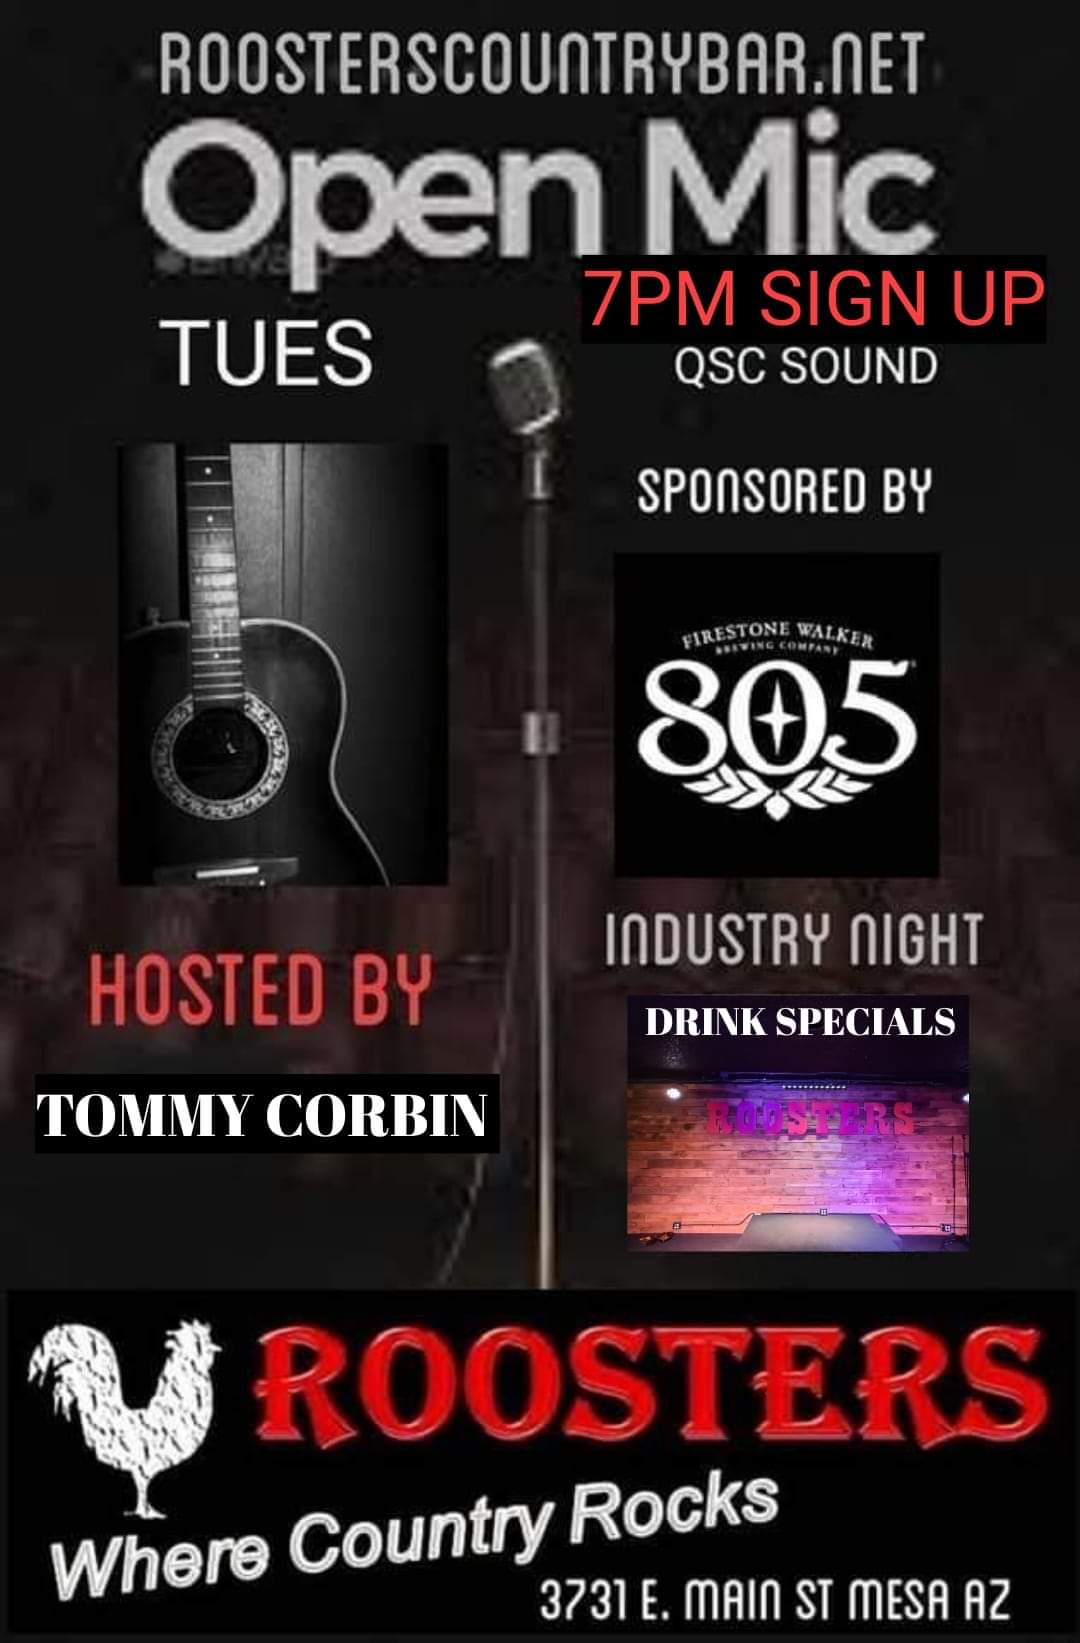 Open Mic Tuesday – Hosted by Tommy Corbin